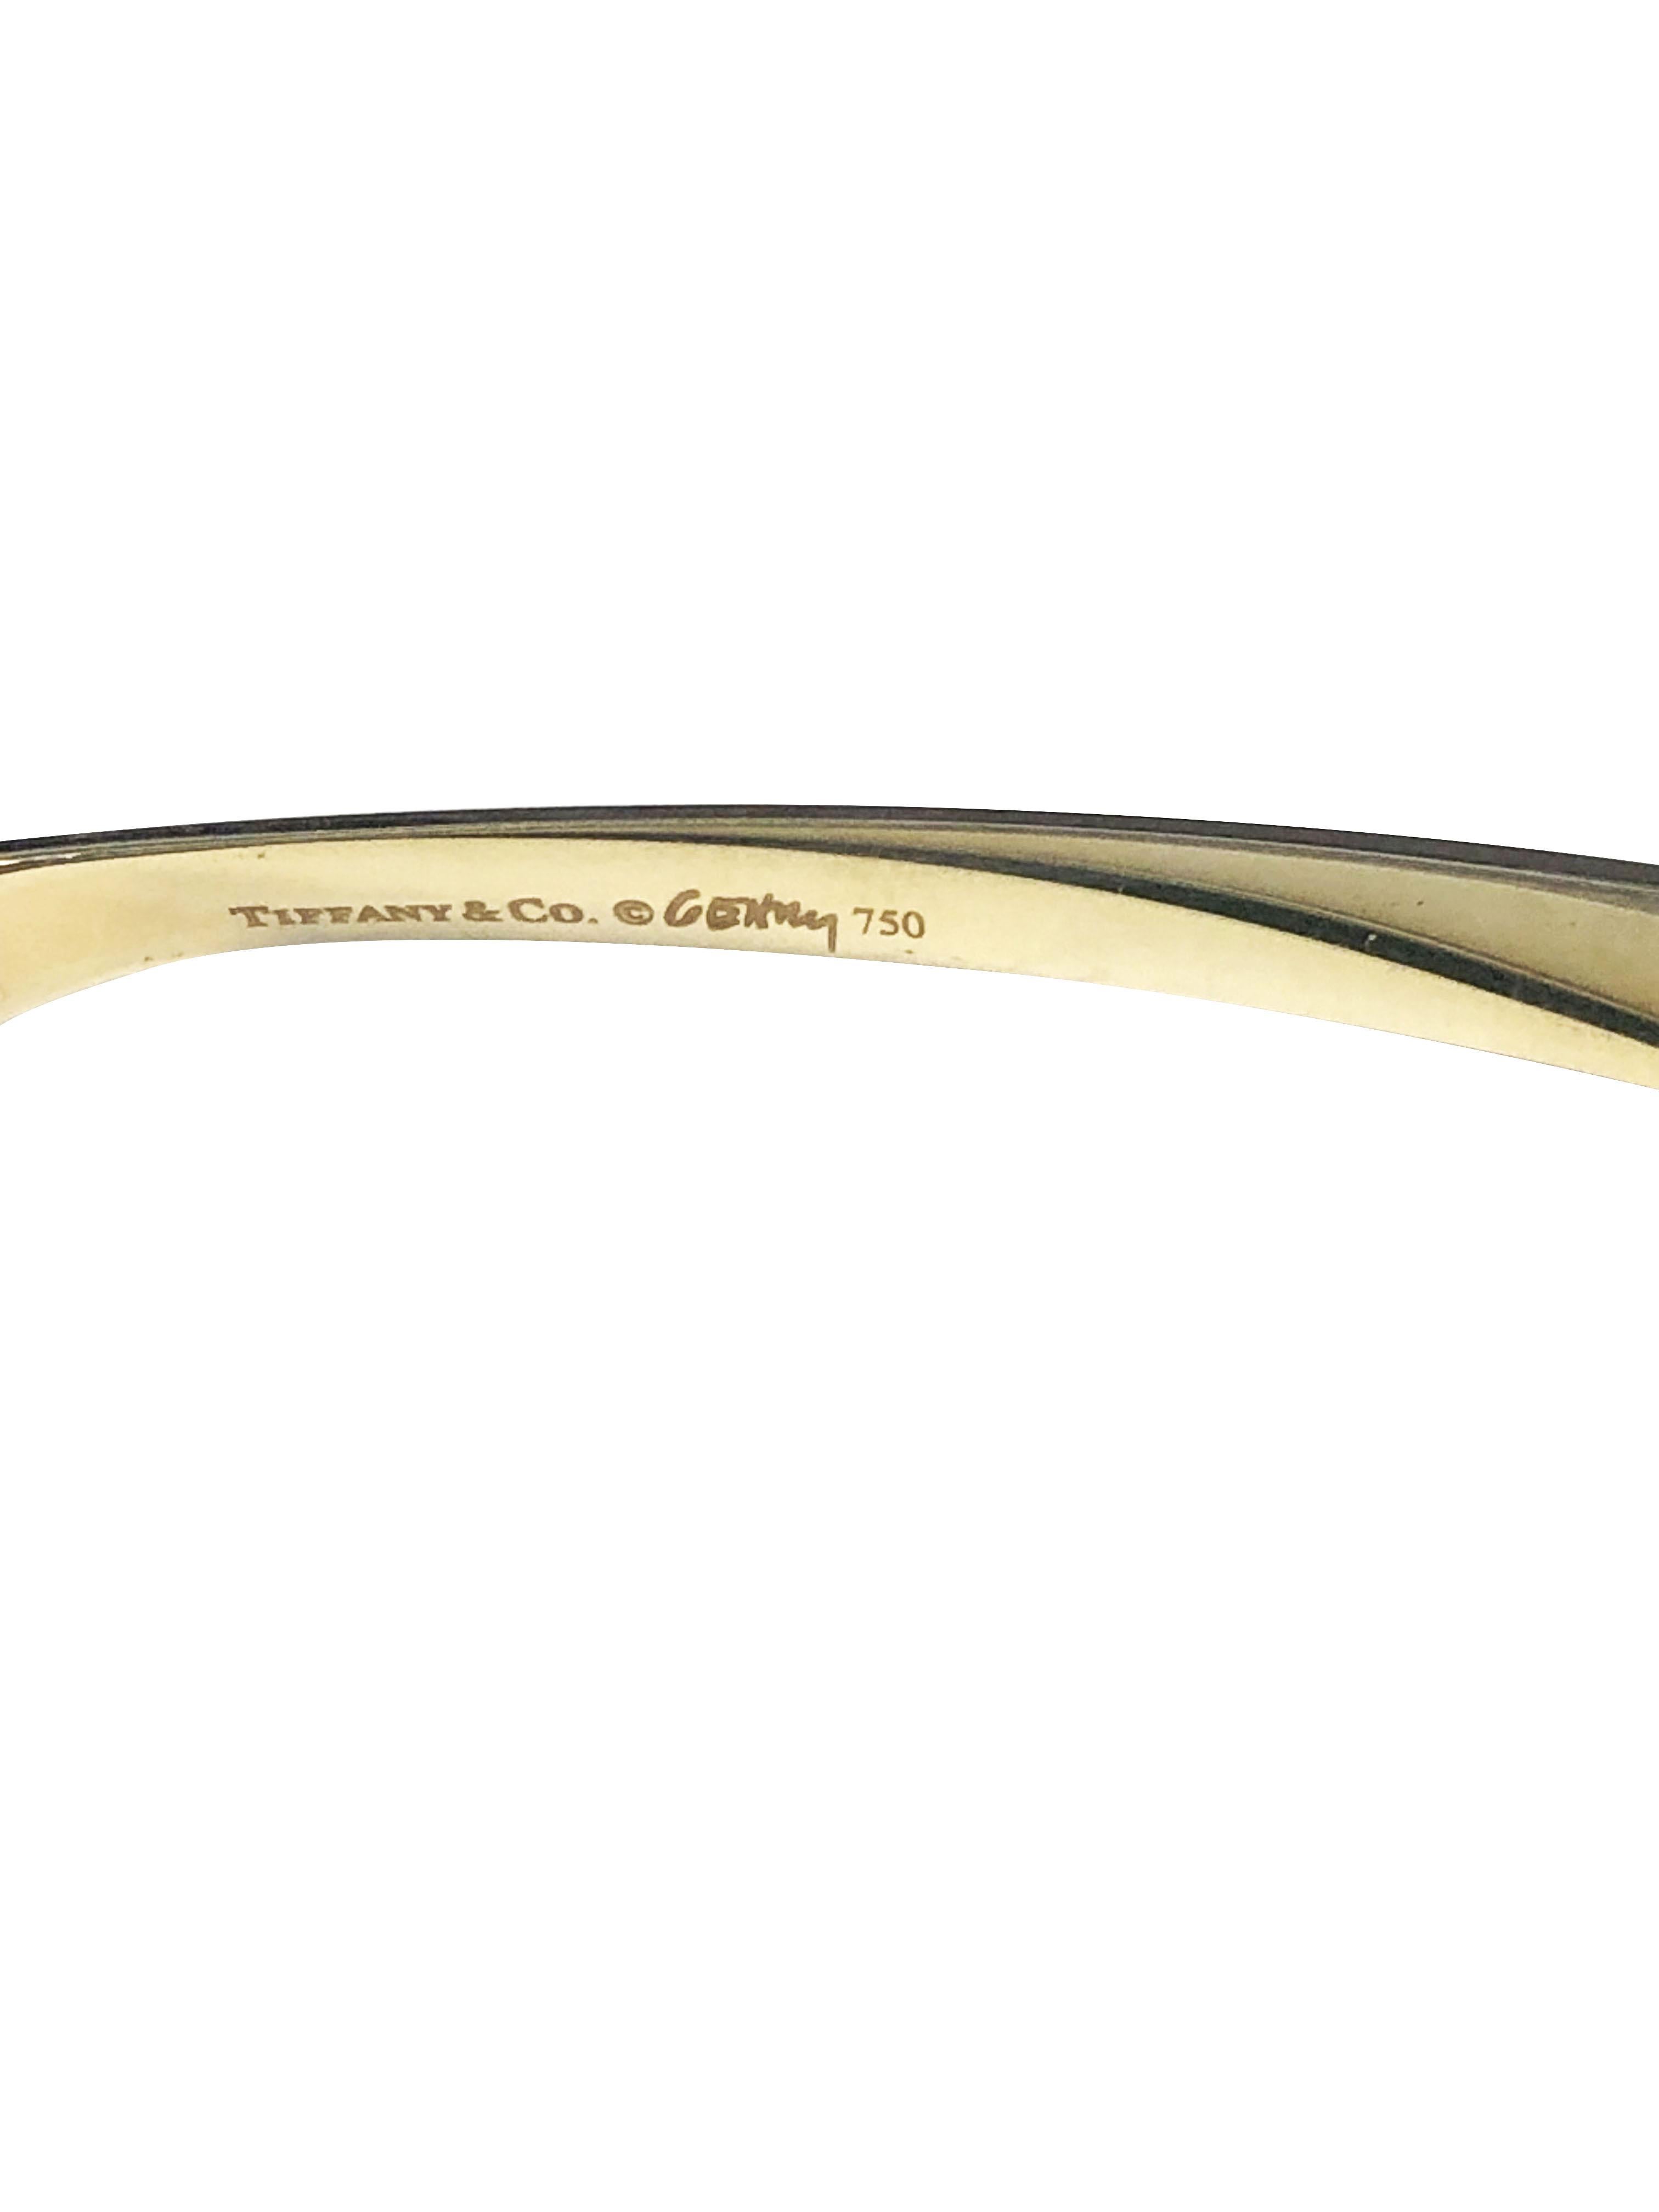 Circa 2000 Frank Gehry for Tiffany & Company 18K Yellow Gold Torque Bracelet, 3.5 M.M. wide with an inside measurement of 7 3/4 inches and weighing 22.6 Grams. Comes in a Tiffany Travel Pouch.